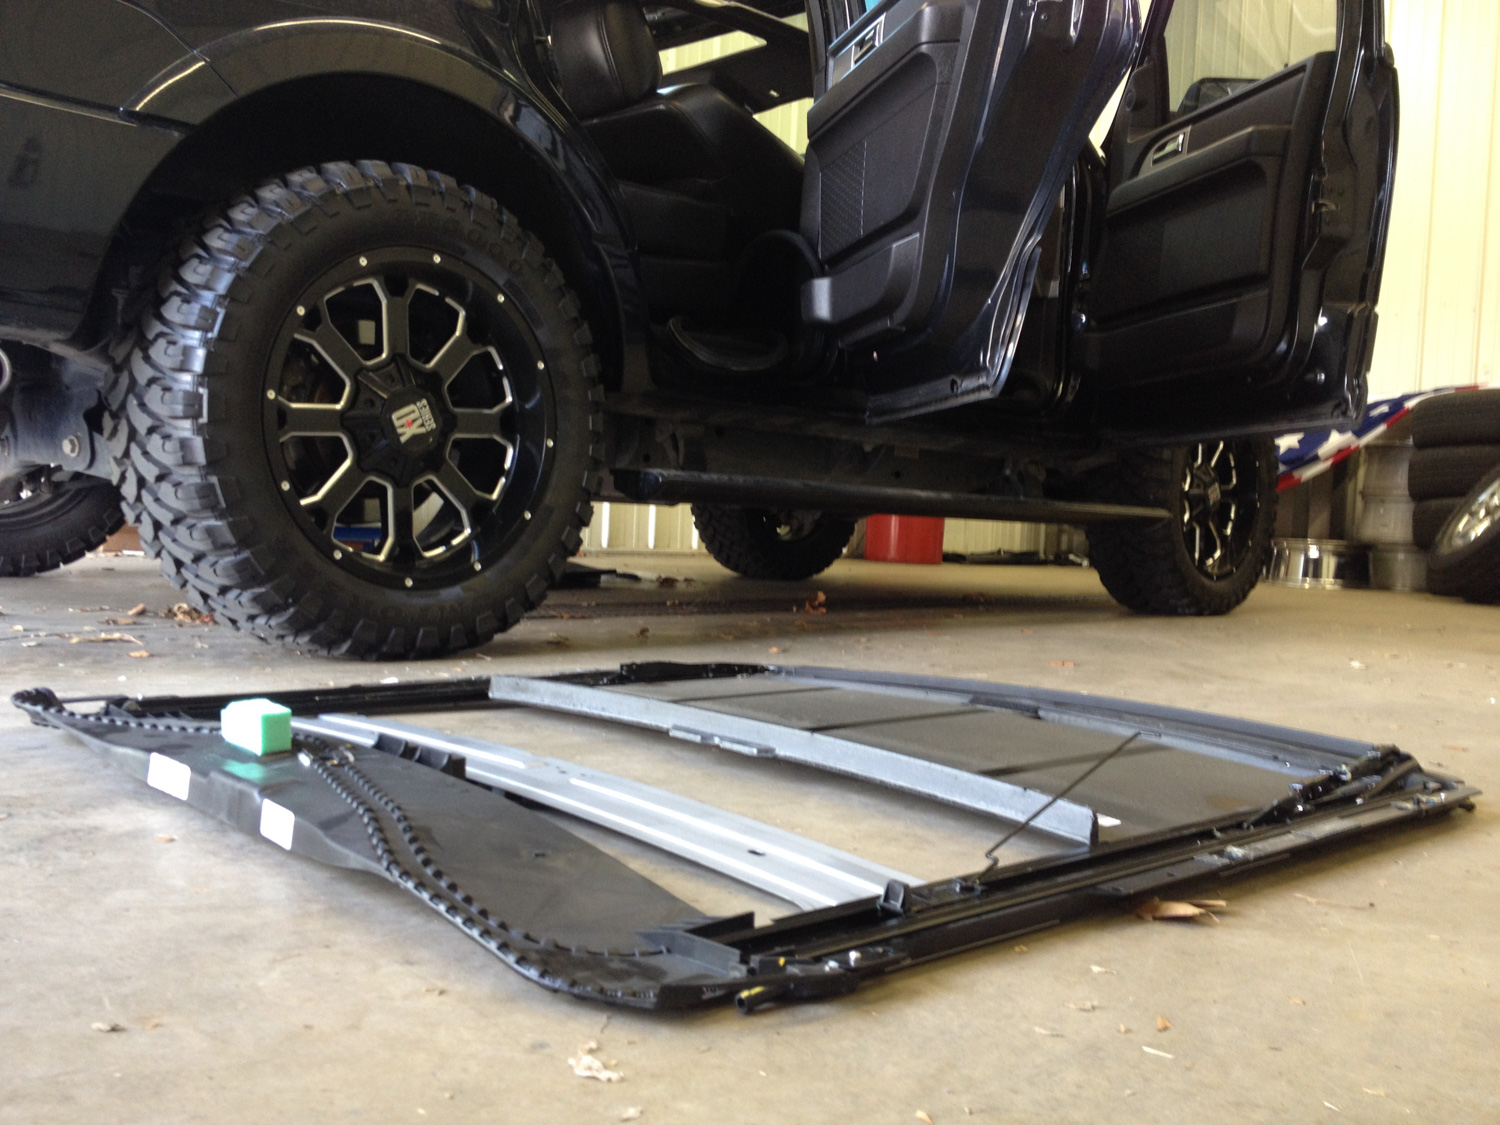 Power sunroof assembly removed from Ford F-150 truck